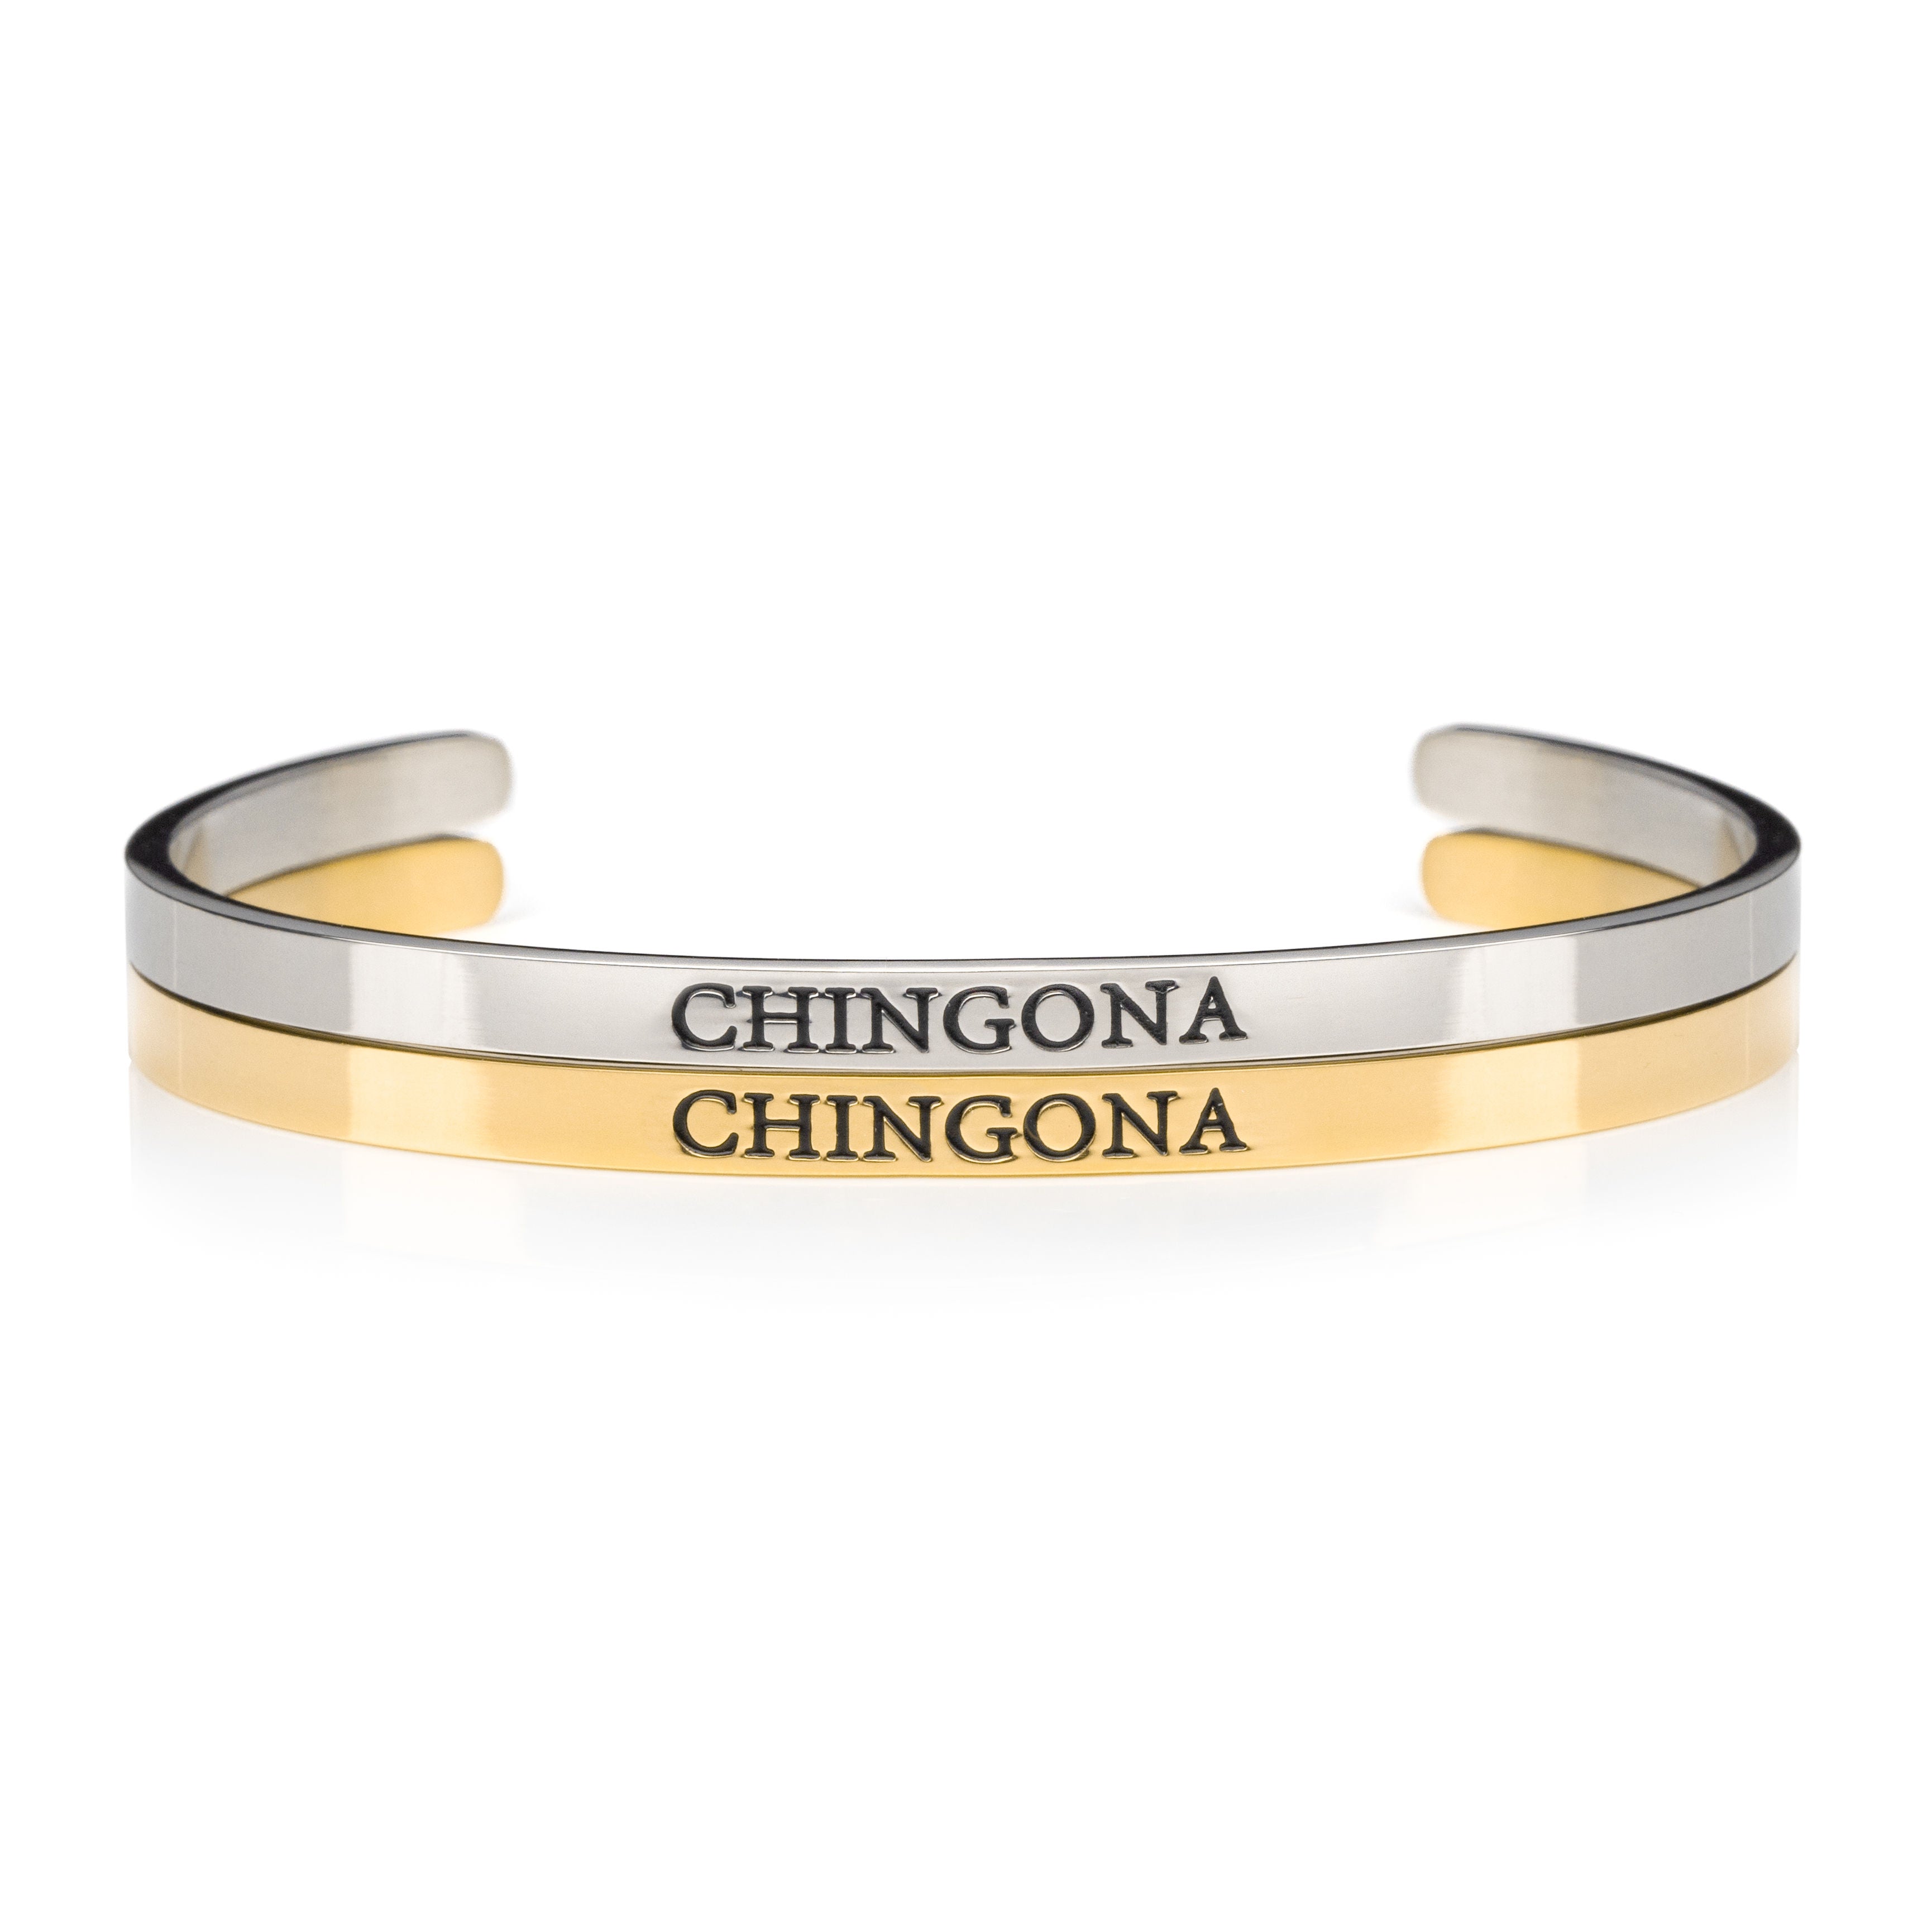 Stylish gold-plated stainless steel cuff bracelet, with the empowering word 'Chingona' stamped onto it.